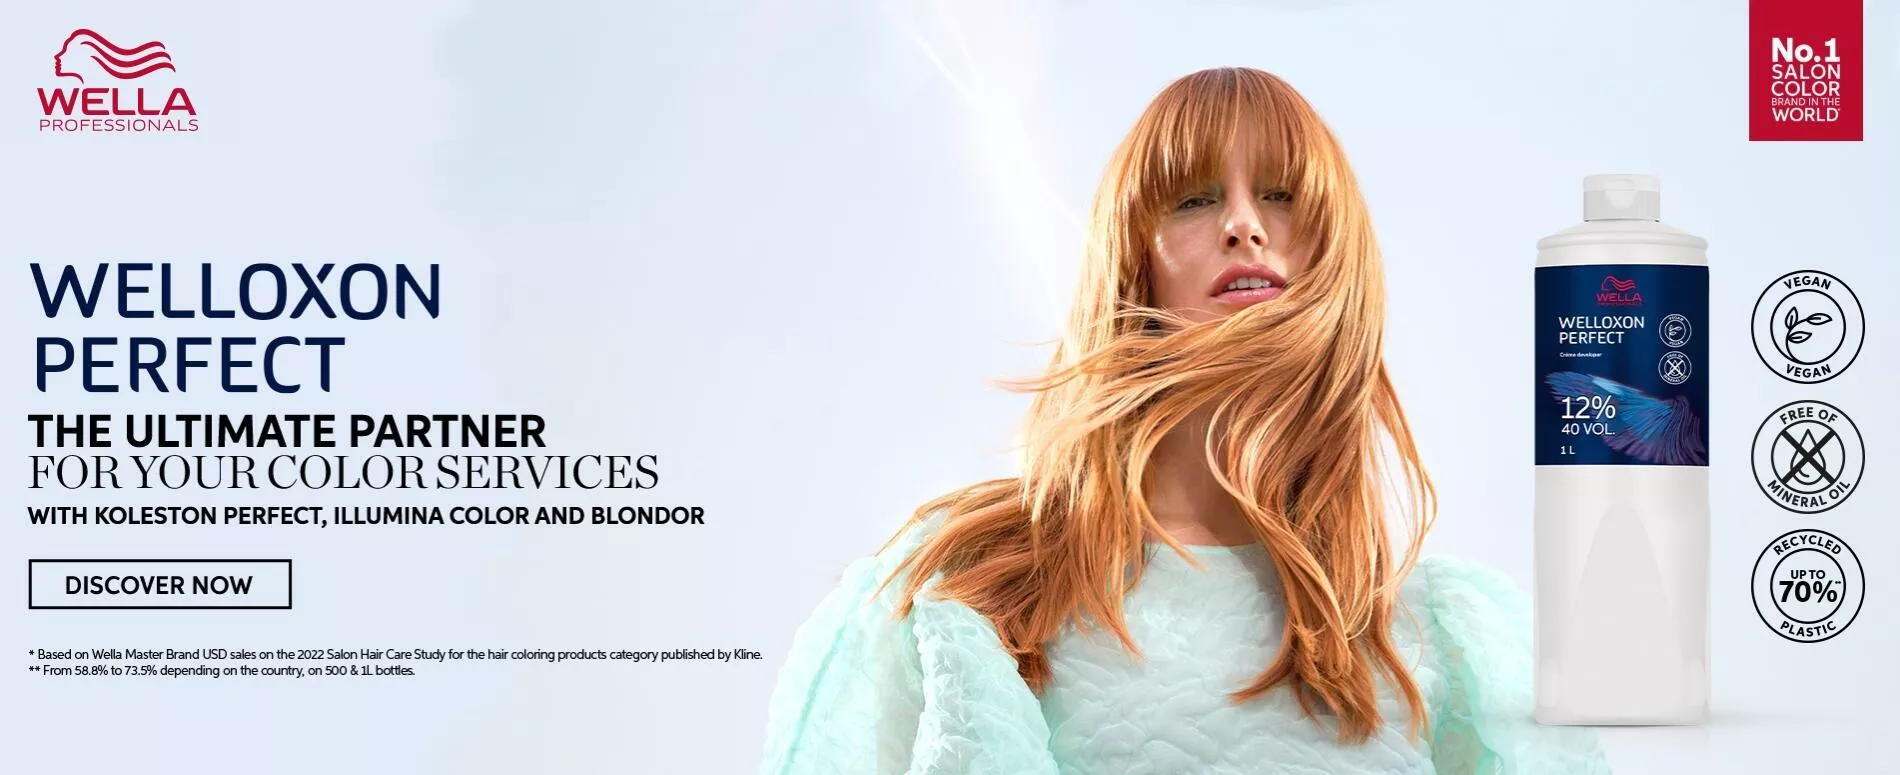 Welloxon Perfect header with product image and ginger model